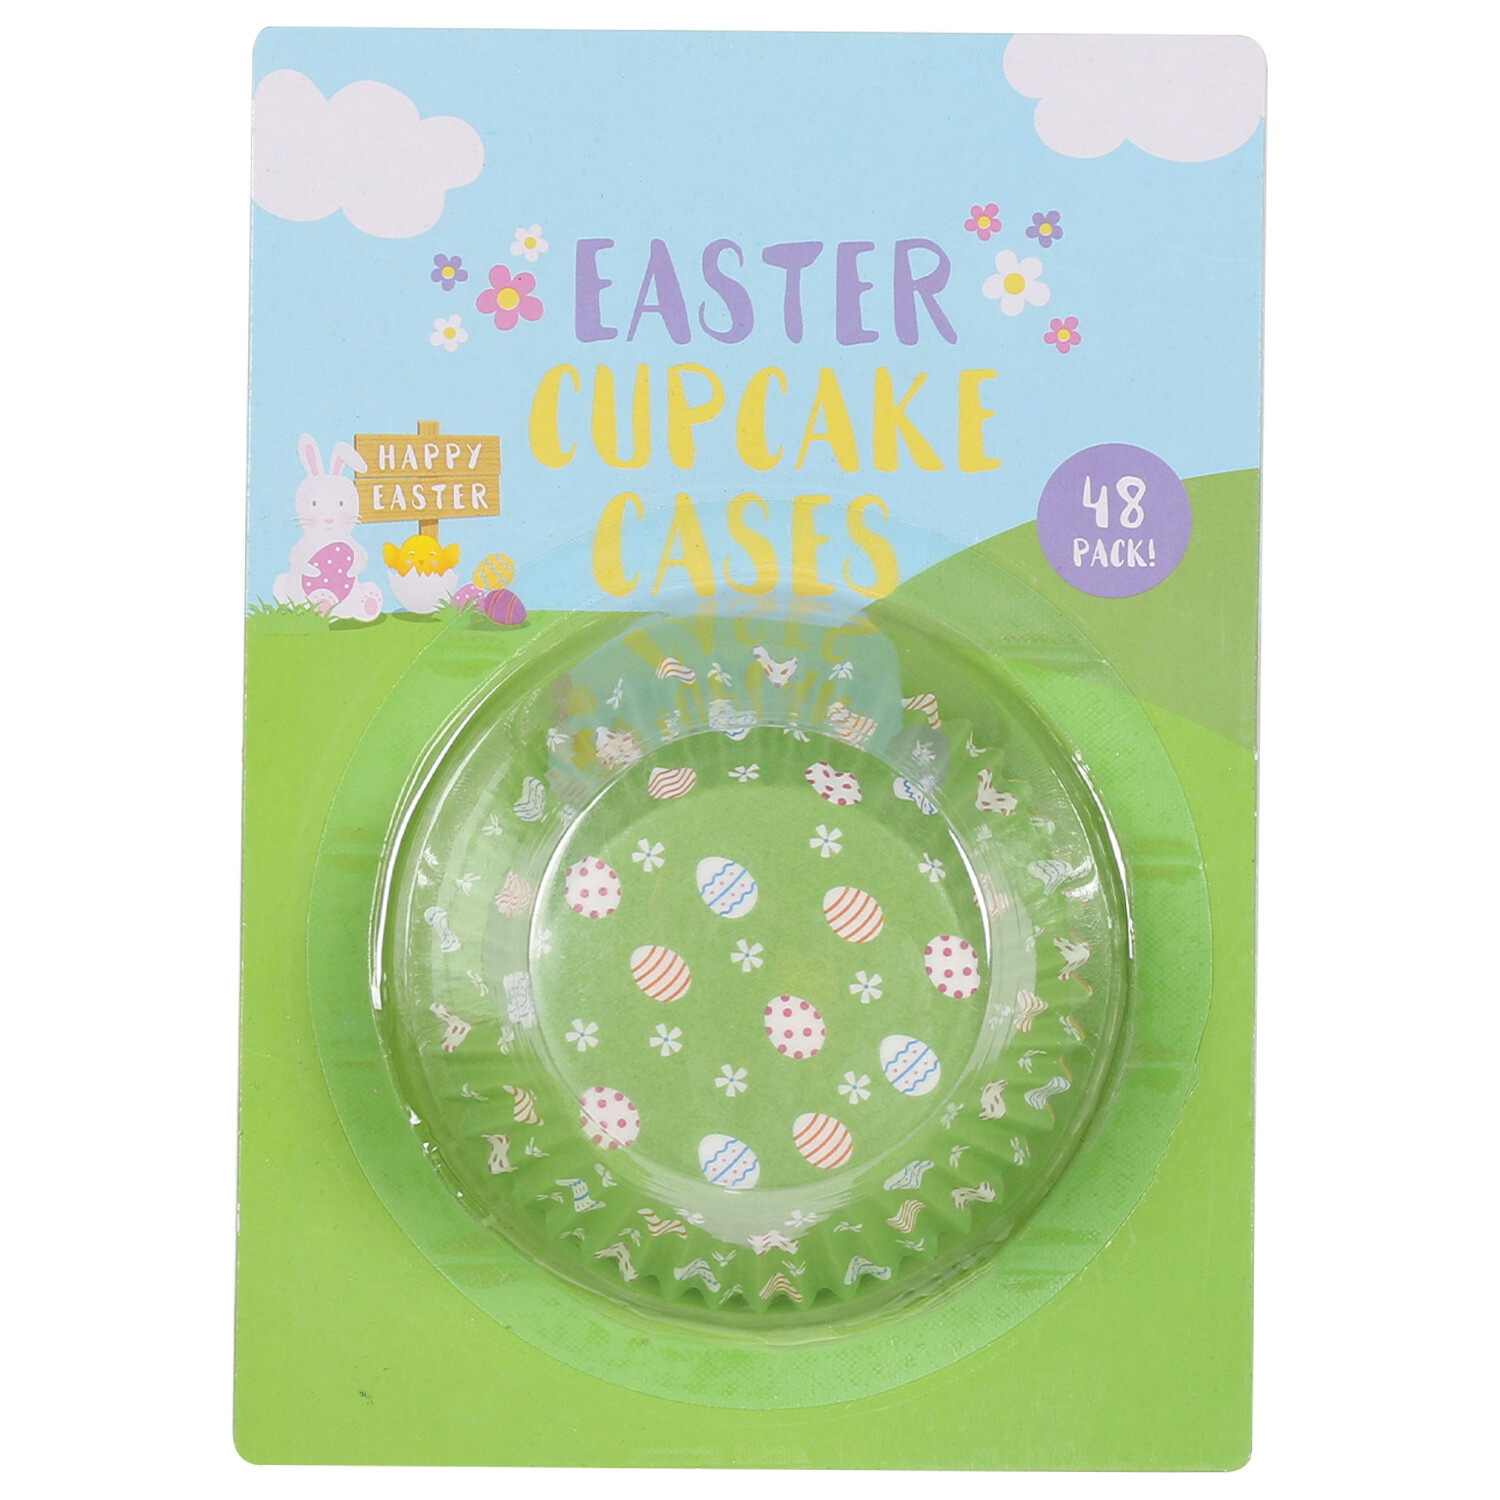 Easter Cupcake Cases 48 Pack Image